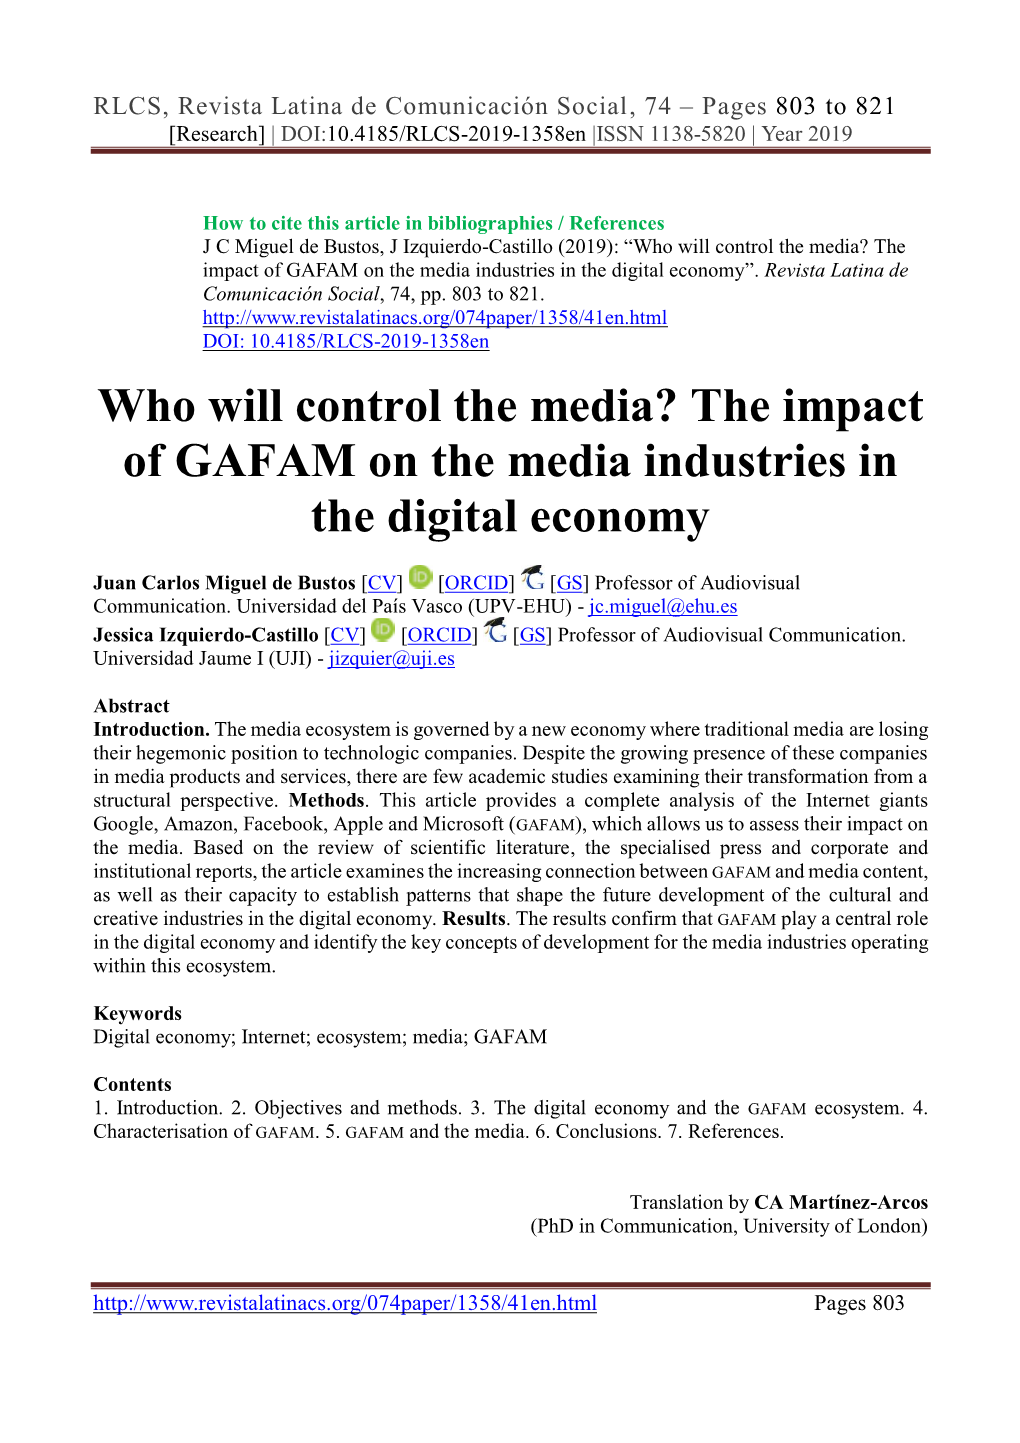 The Impact of GAFAM on the Media Industries in the Digital Economy”